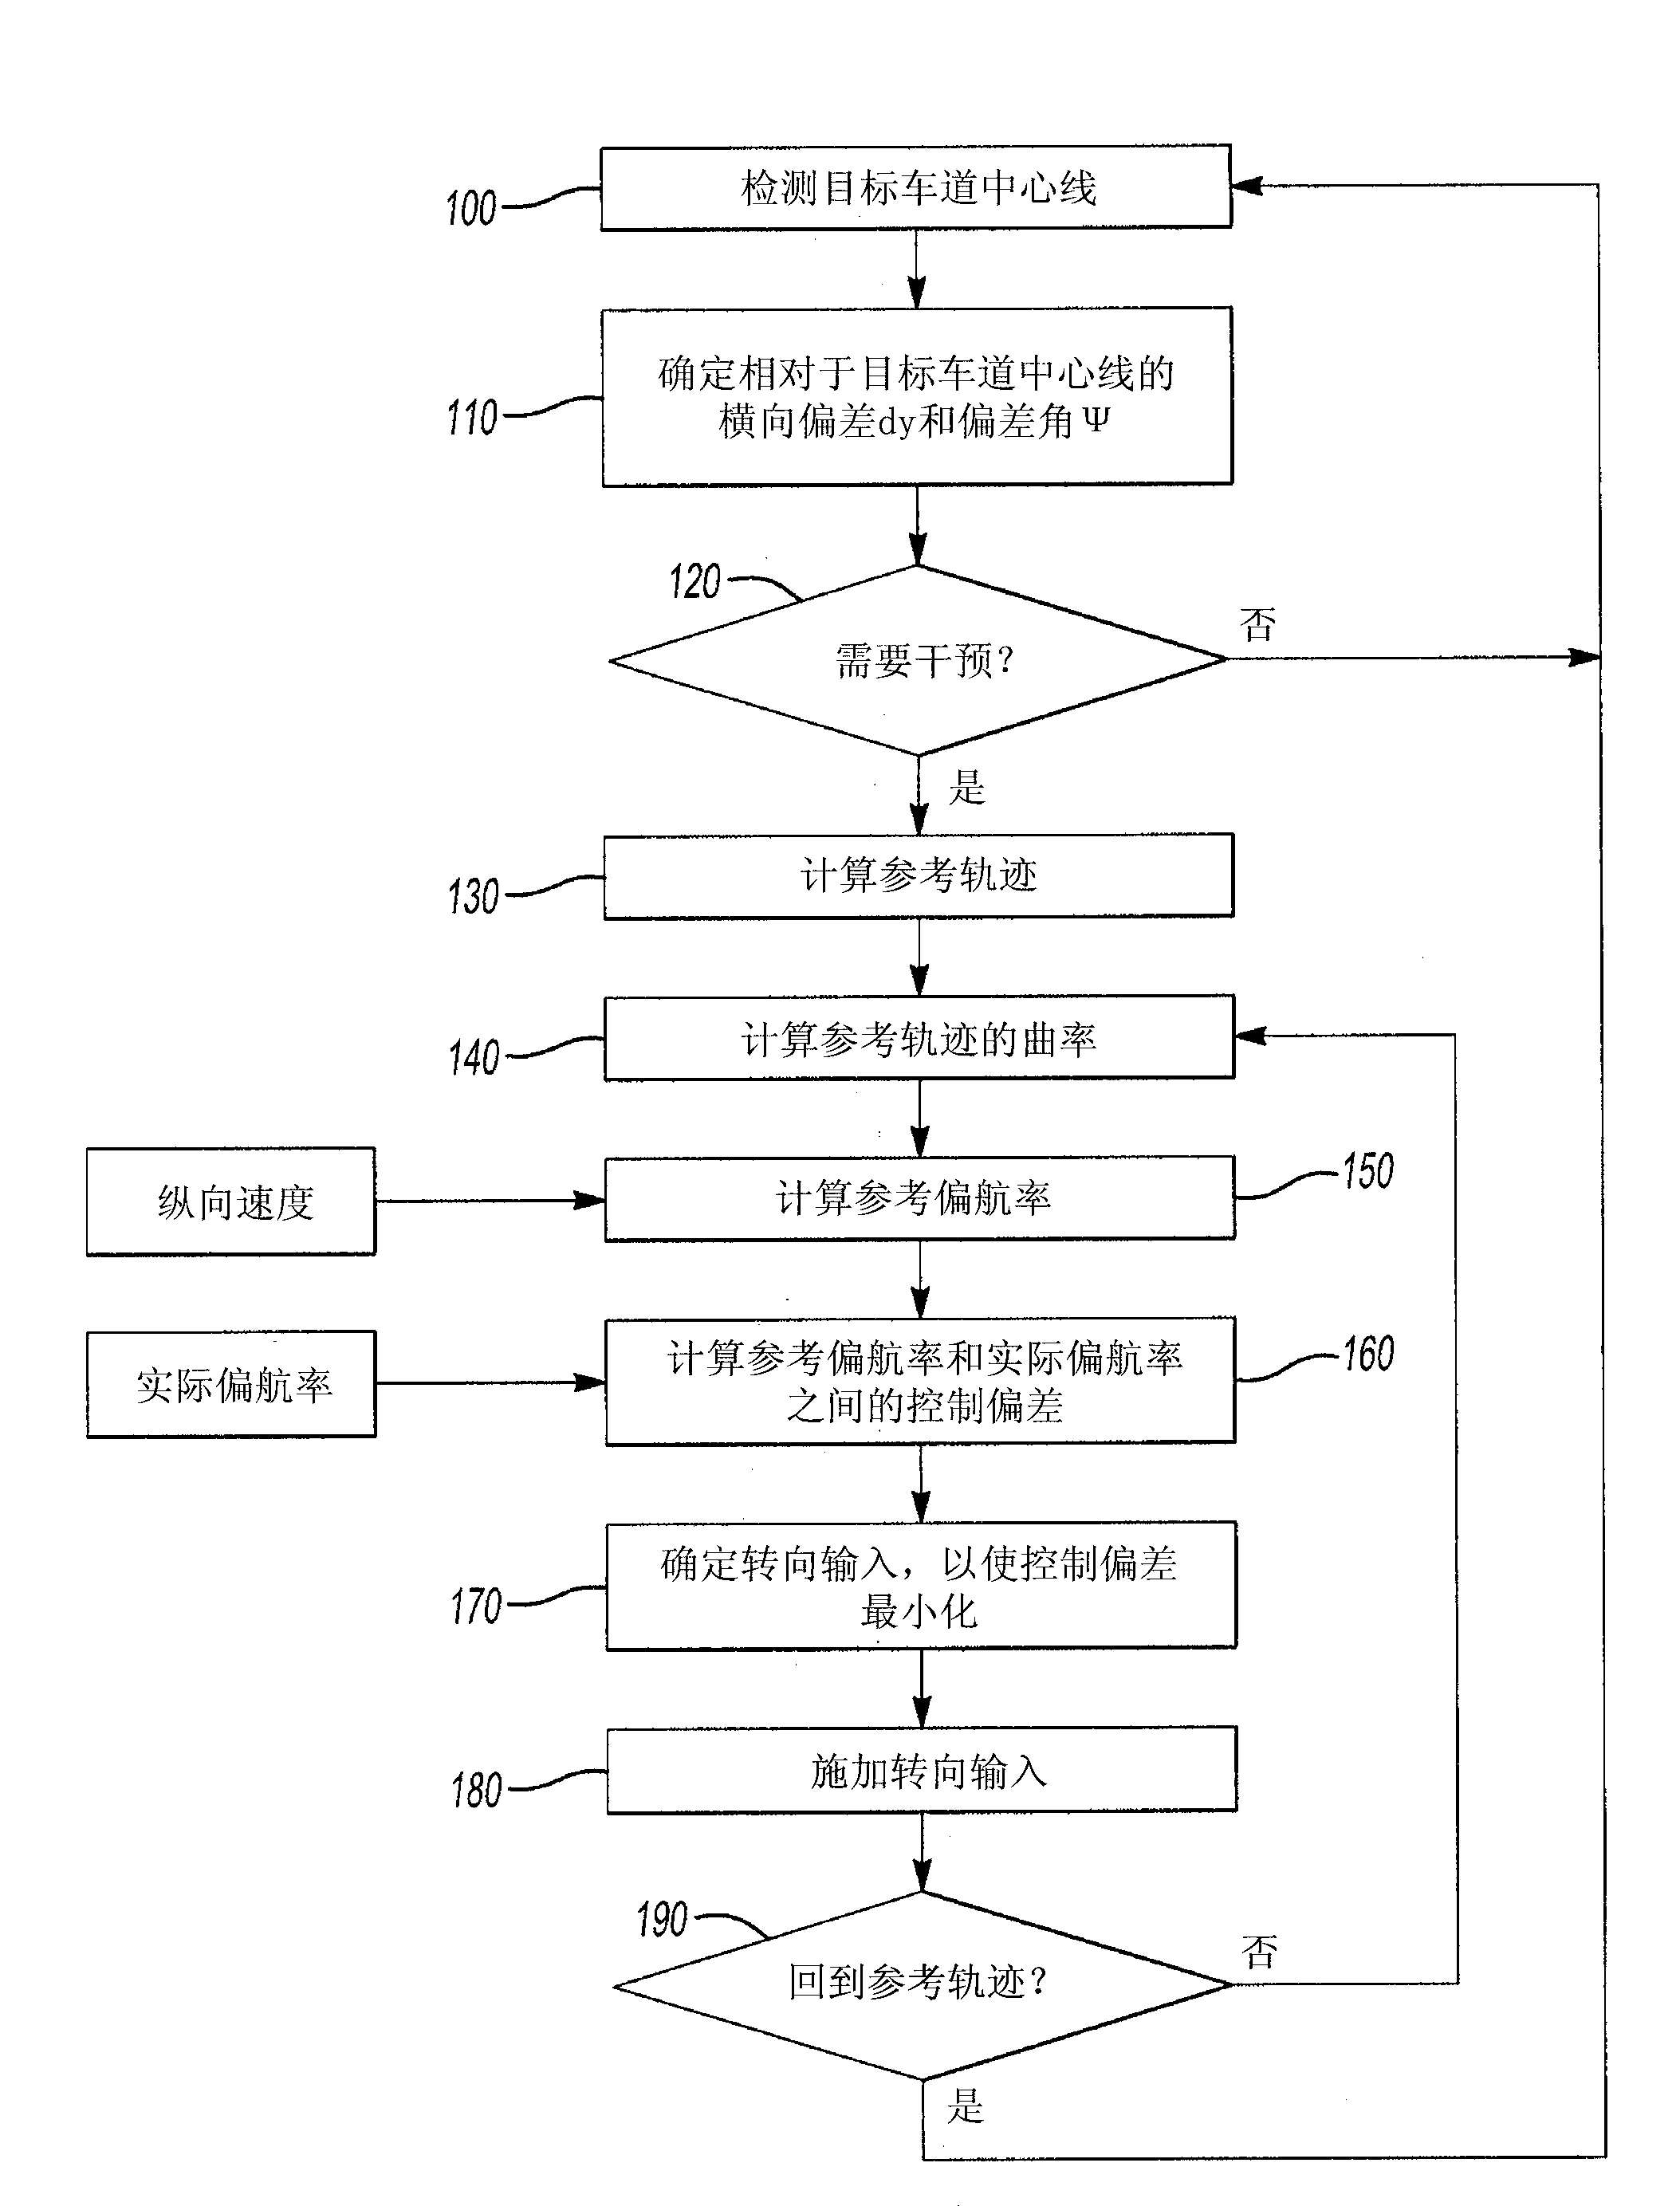 Lane-keeping assistance method for a motor vehicle